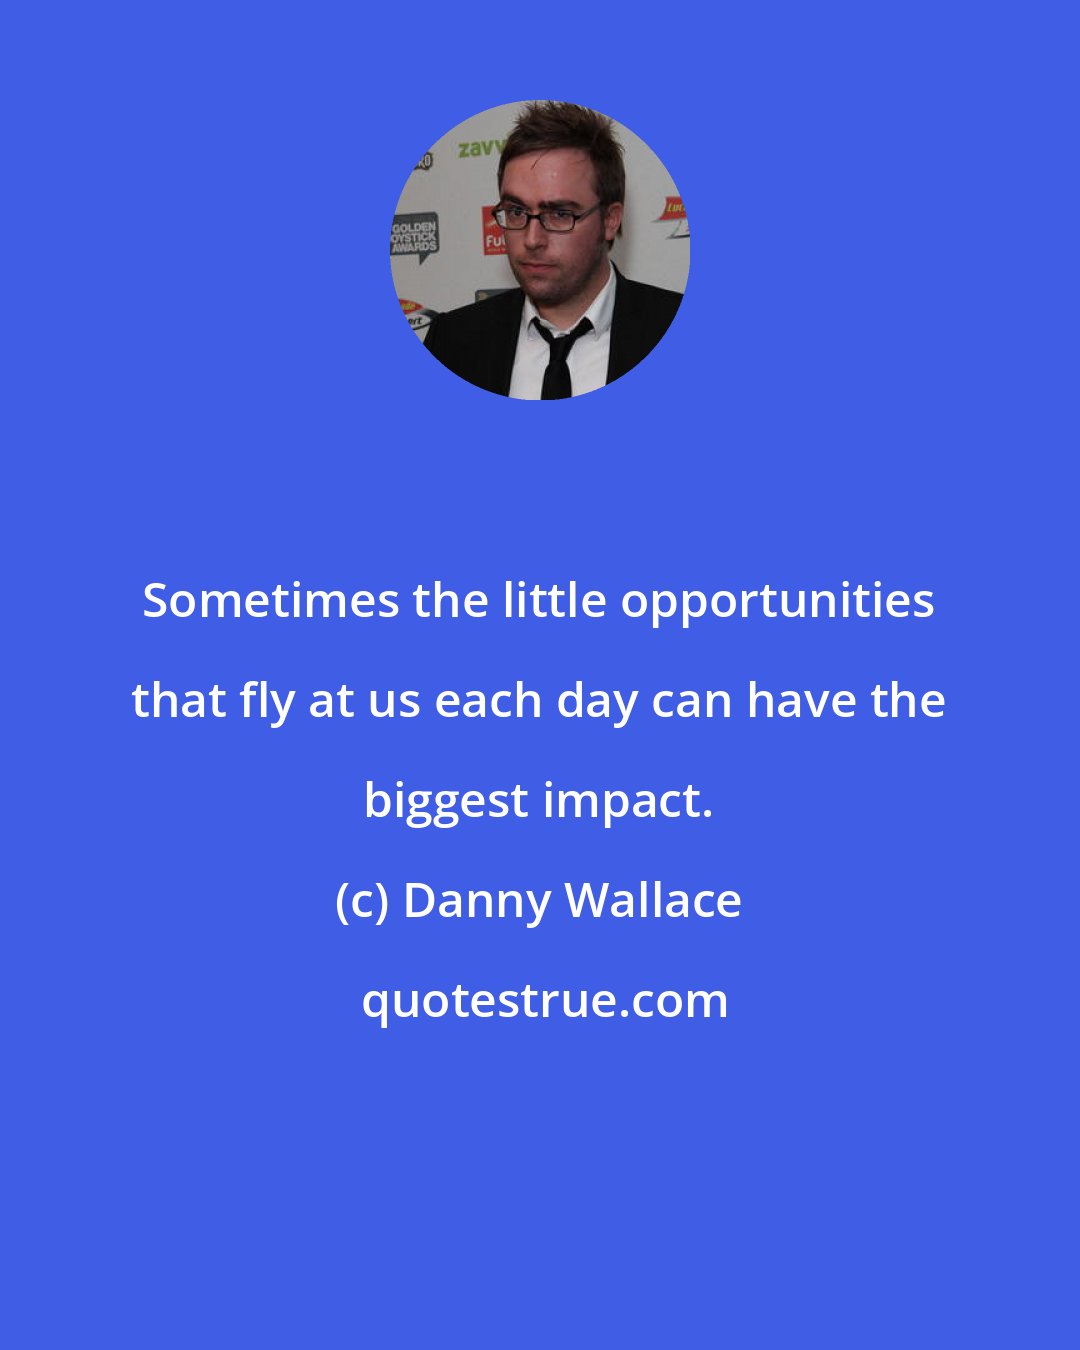 Danny Wallace: Sometimes the little opportunities that fly at us each day can have the biggest impact.